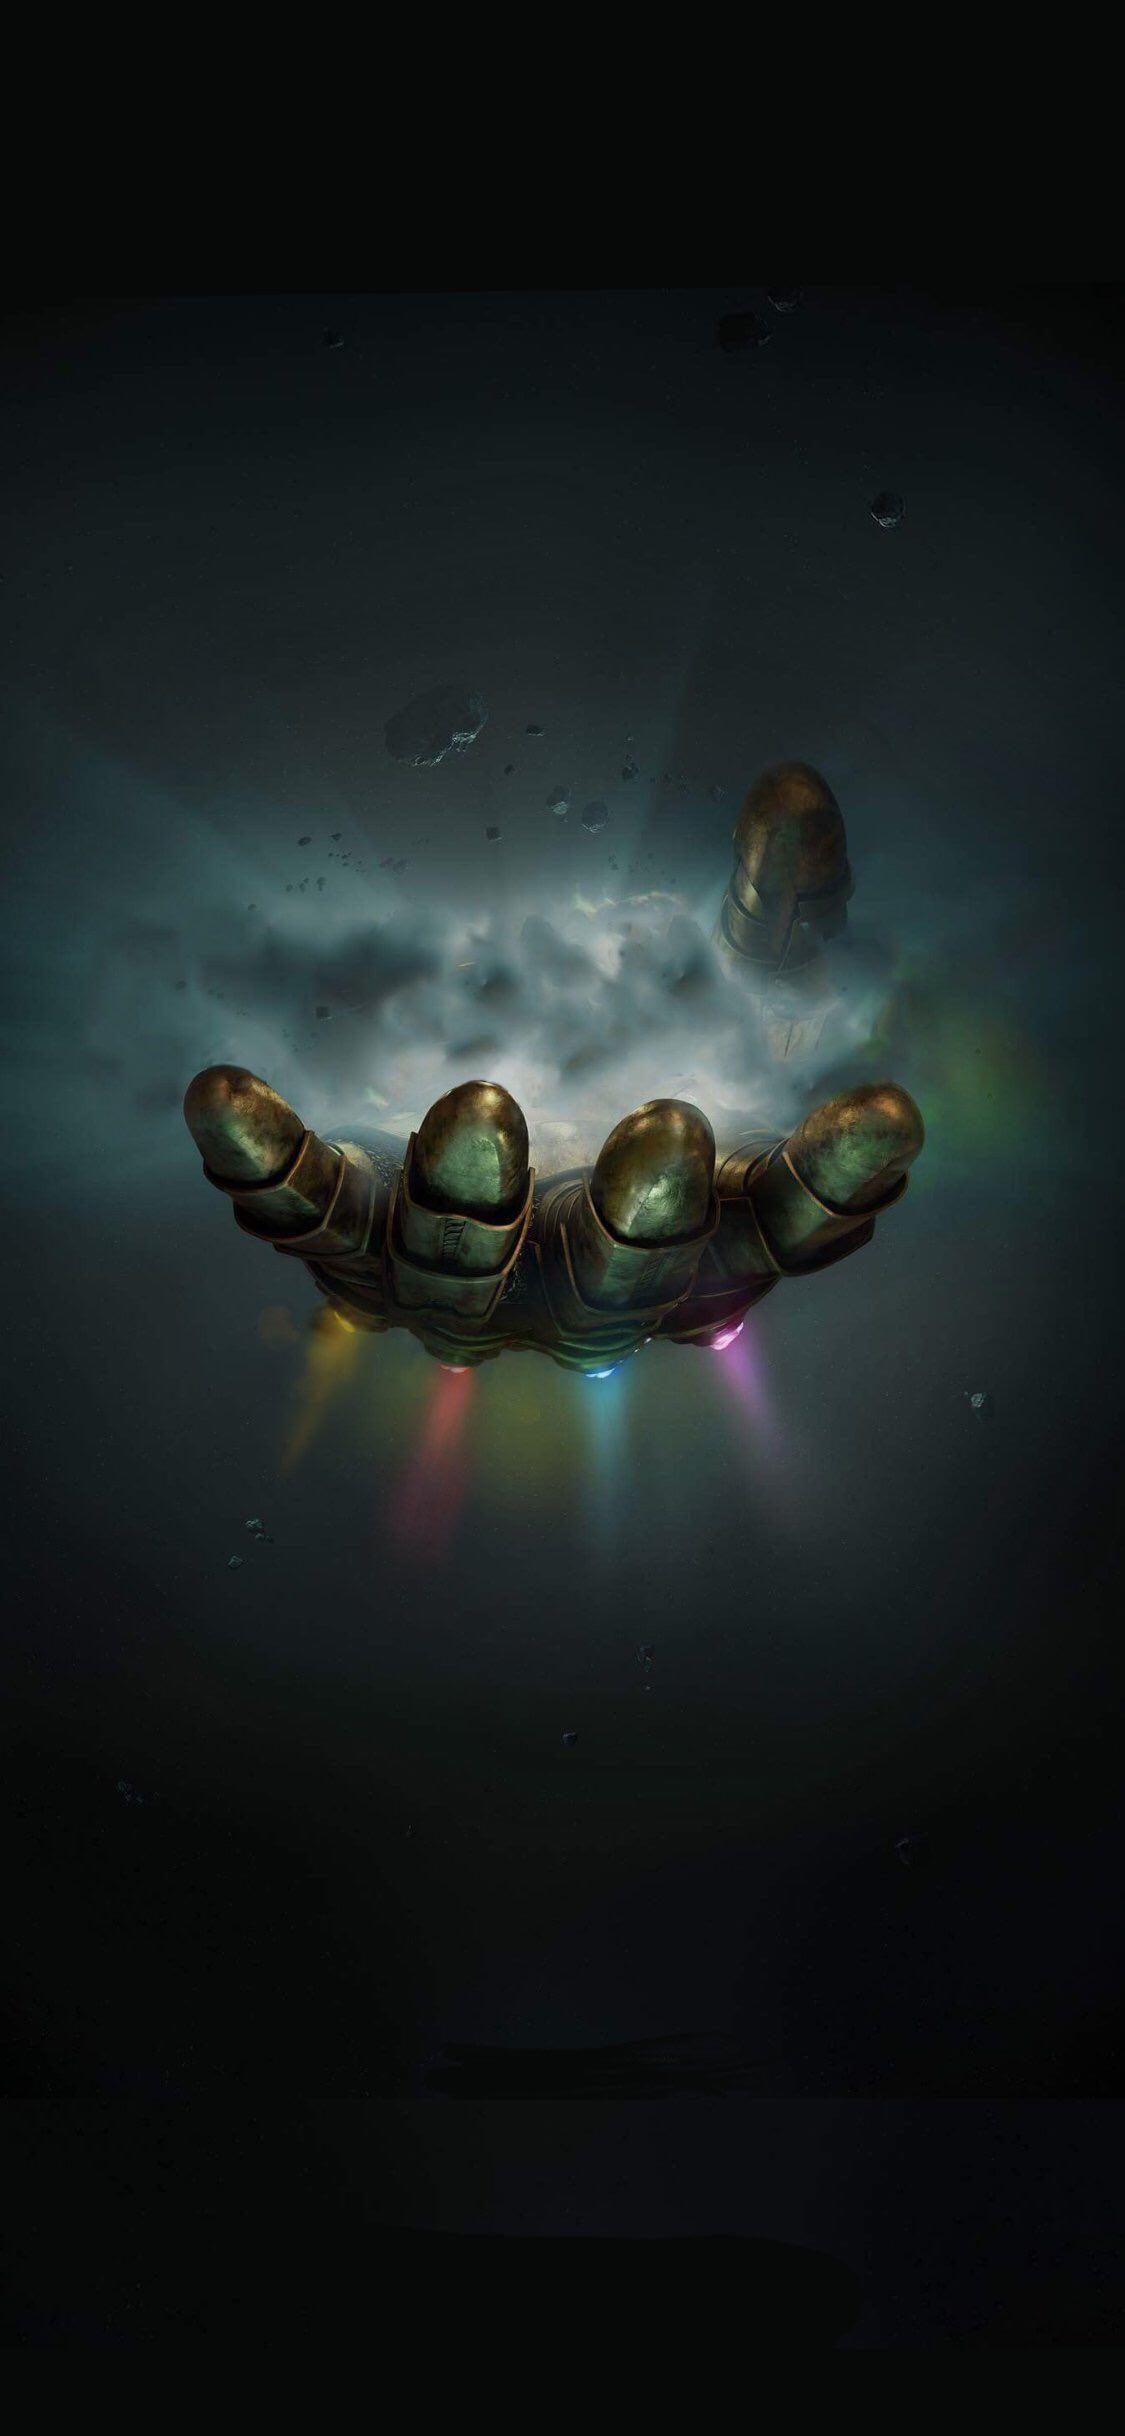 Download The Infinity Gauntlet of Thanos Wallpaper | Wallpapers.com